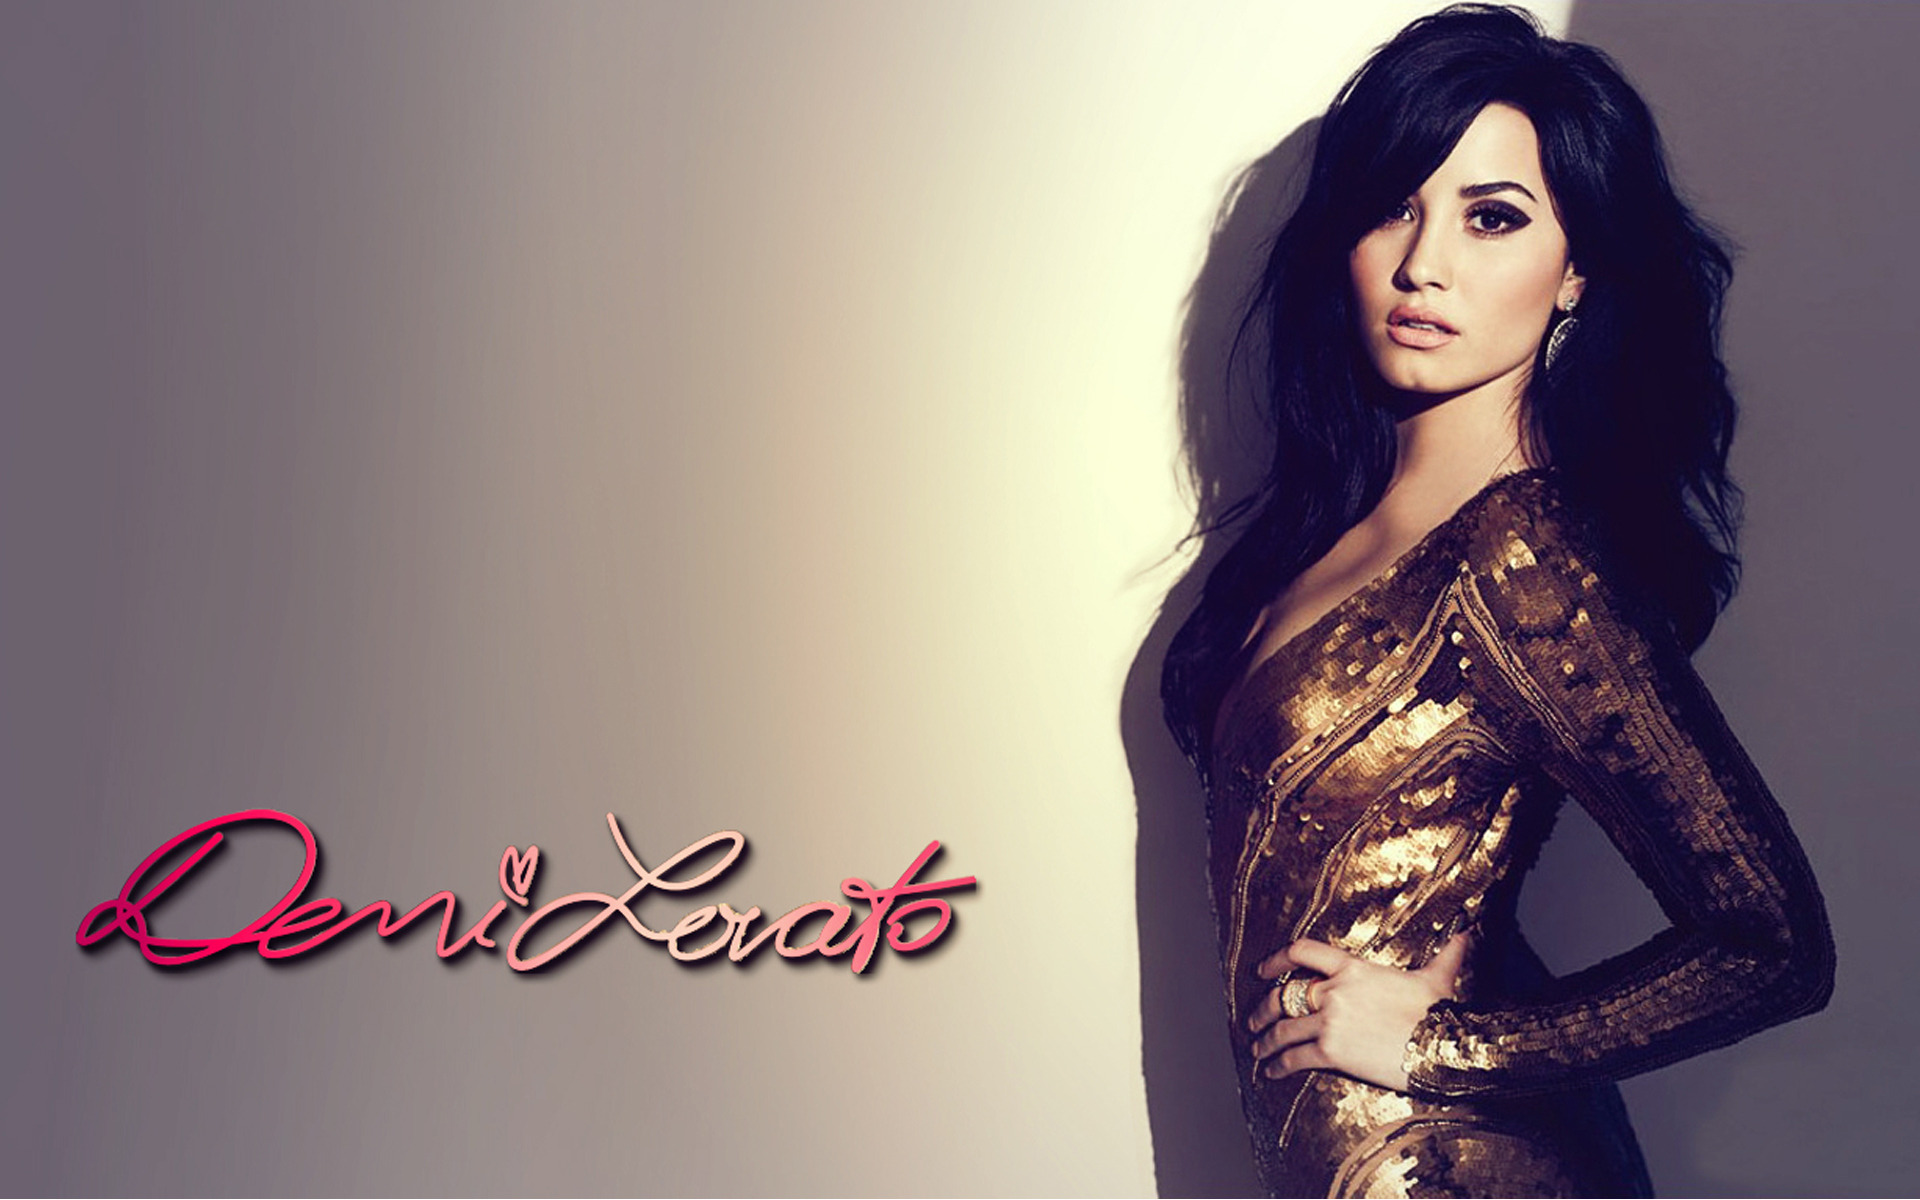 Demi Lovato Backgrounds   Wallpaper High Definition High Quality